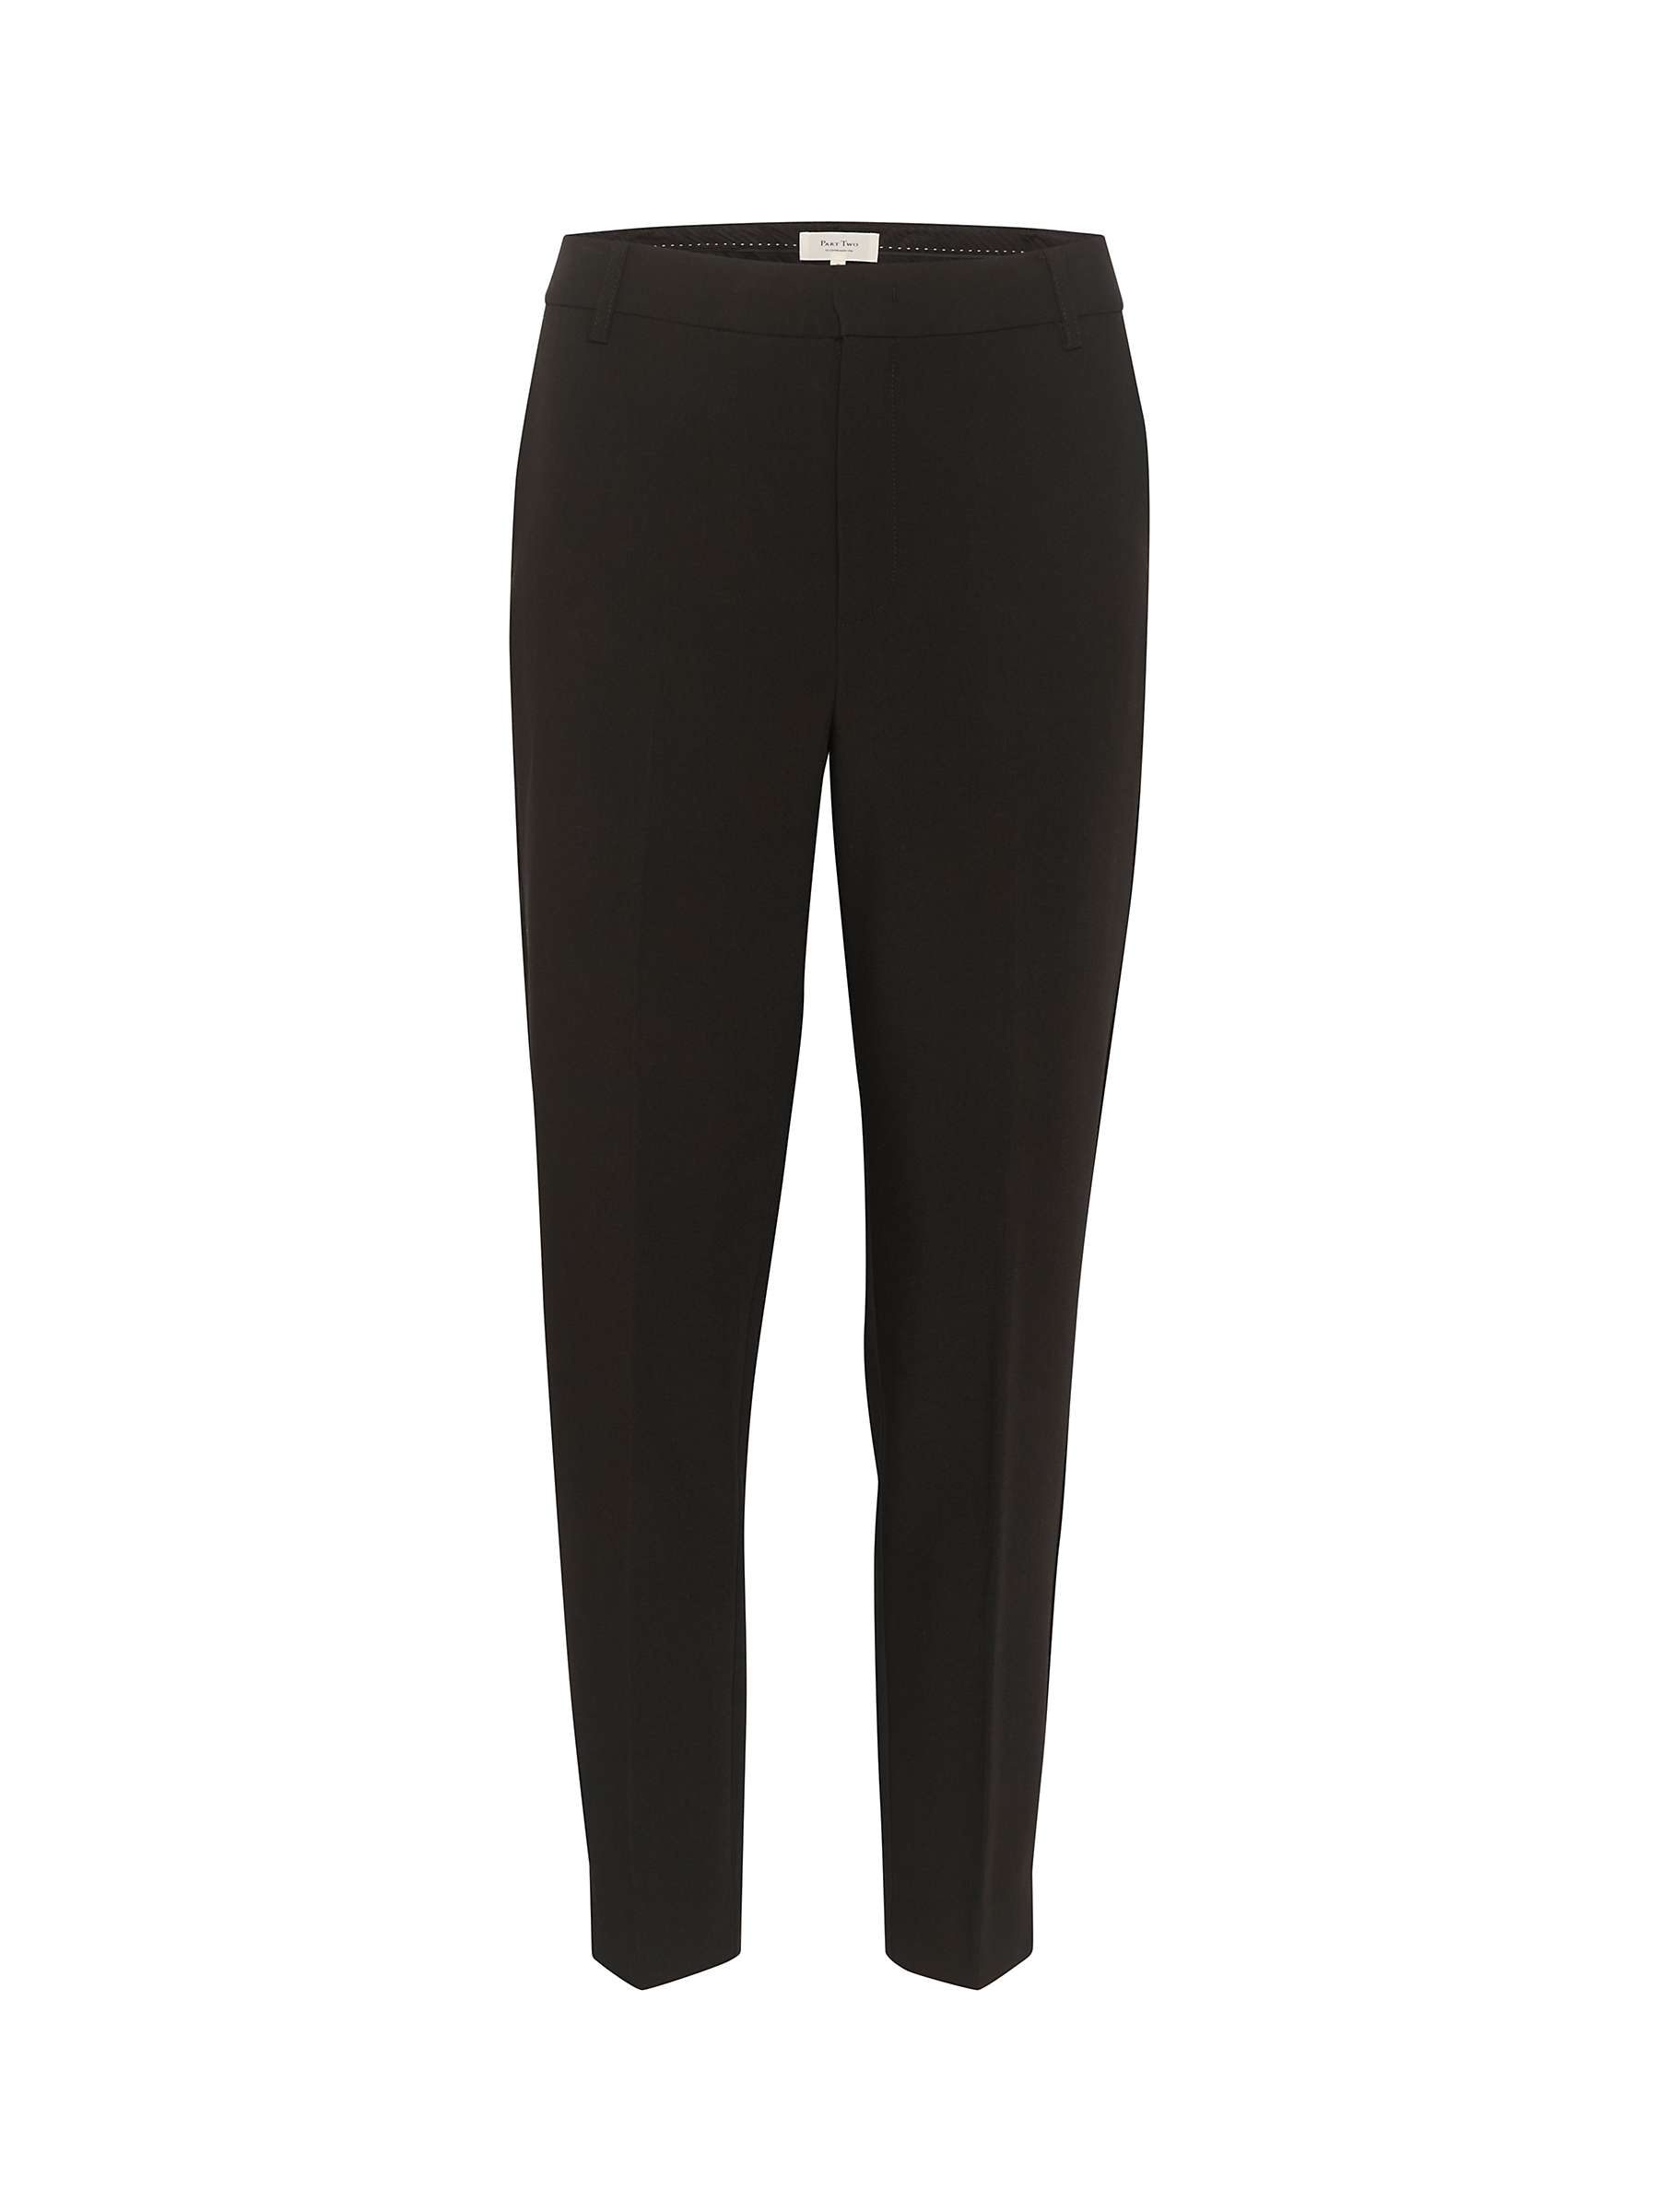 Buy Part Two Urbana Straight High Waist Trousers, Black Online at johnlewis.com